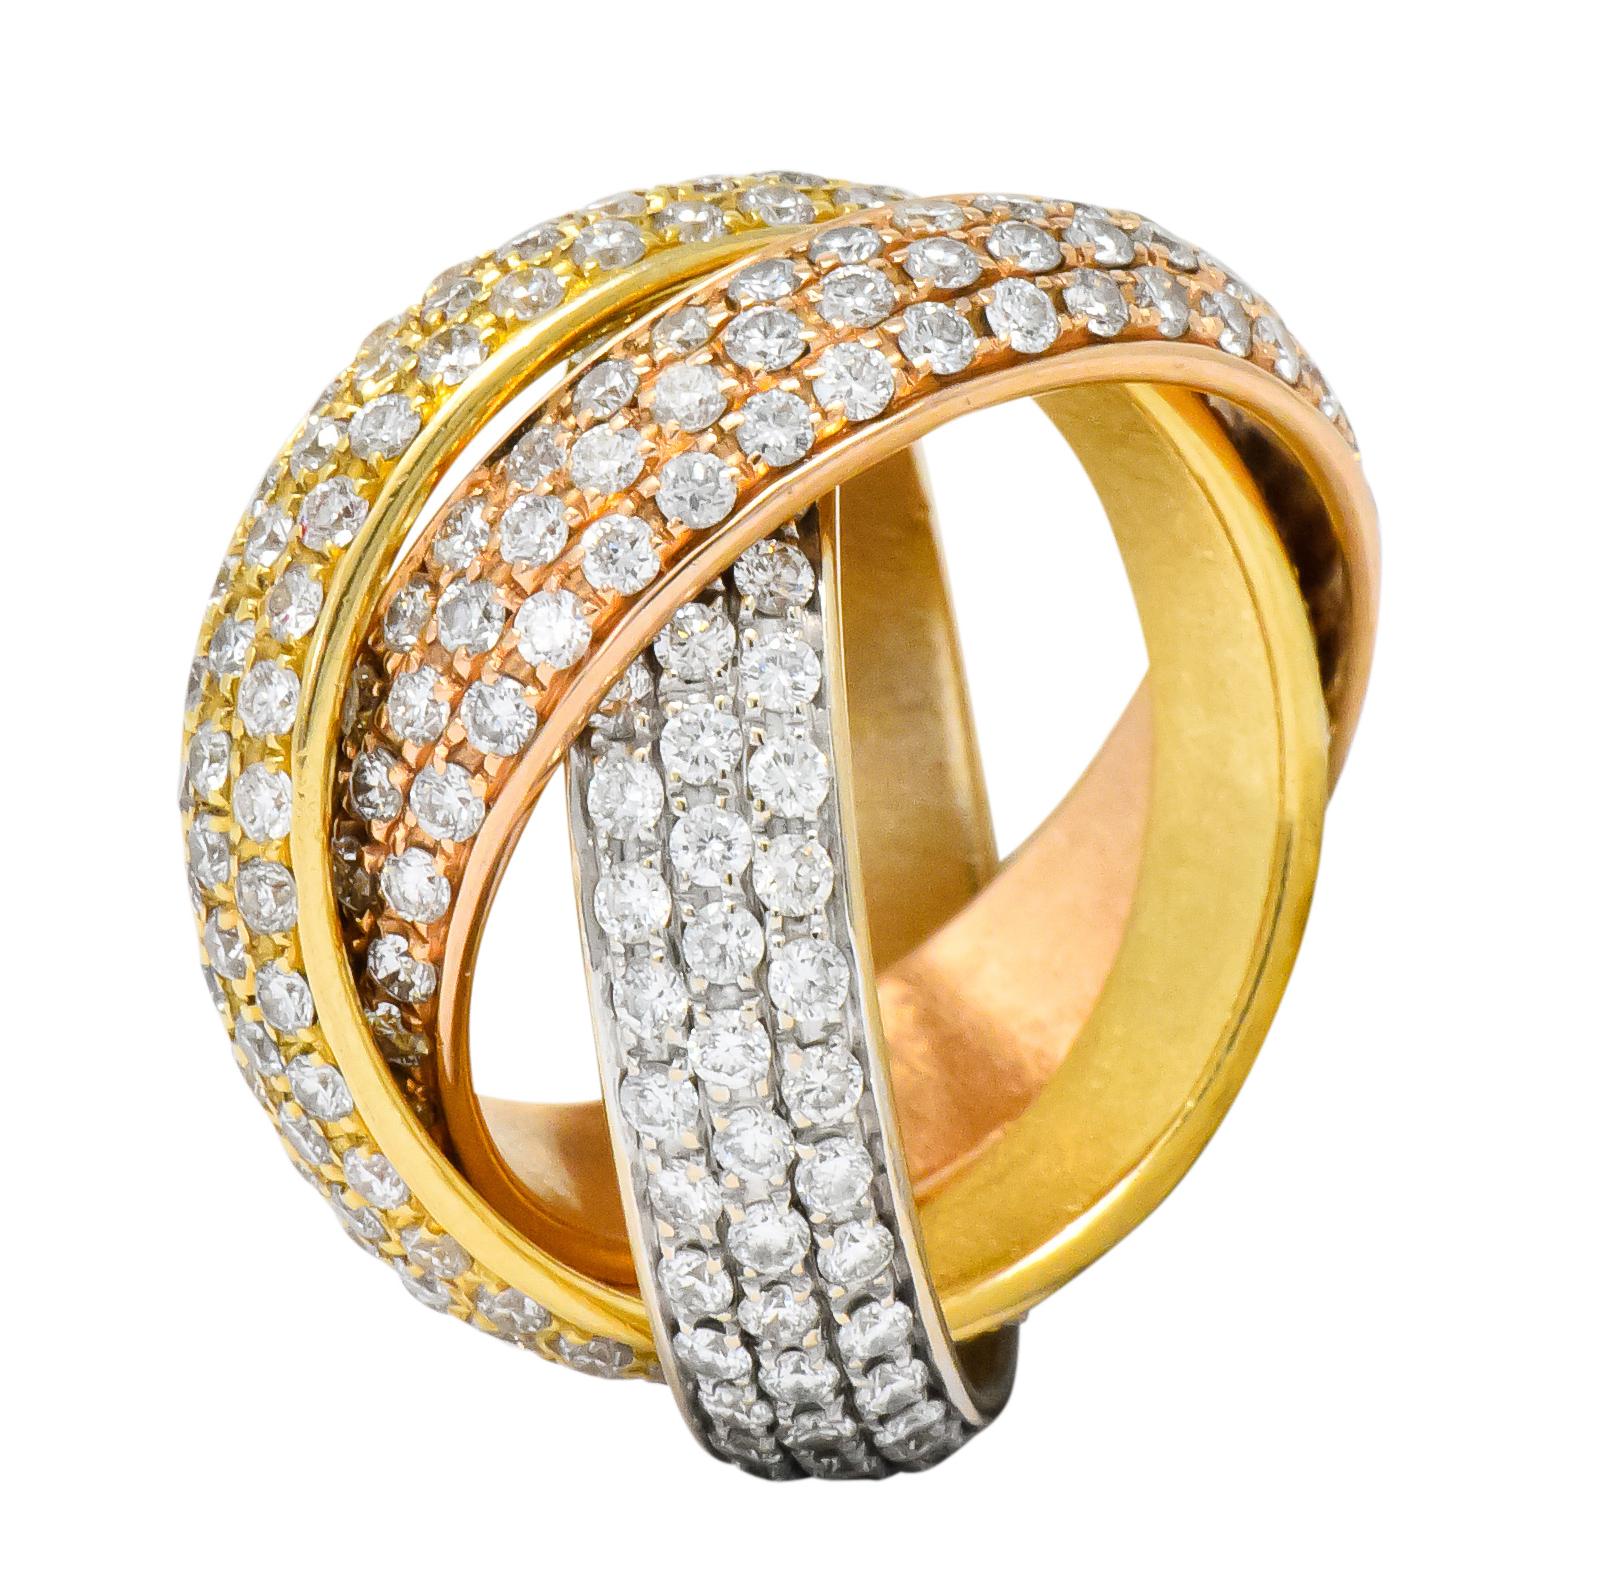 Rolling style ring with three intersecting pavé diamond bands of white, yellow and rose gold

Set throughout with round brilliant cut diamonds weighing approximately 5.00 carats total, H/I color and VS to SI clarity

Fully signed Rabino with Italian